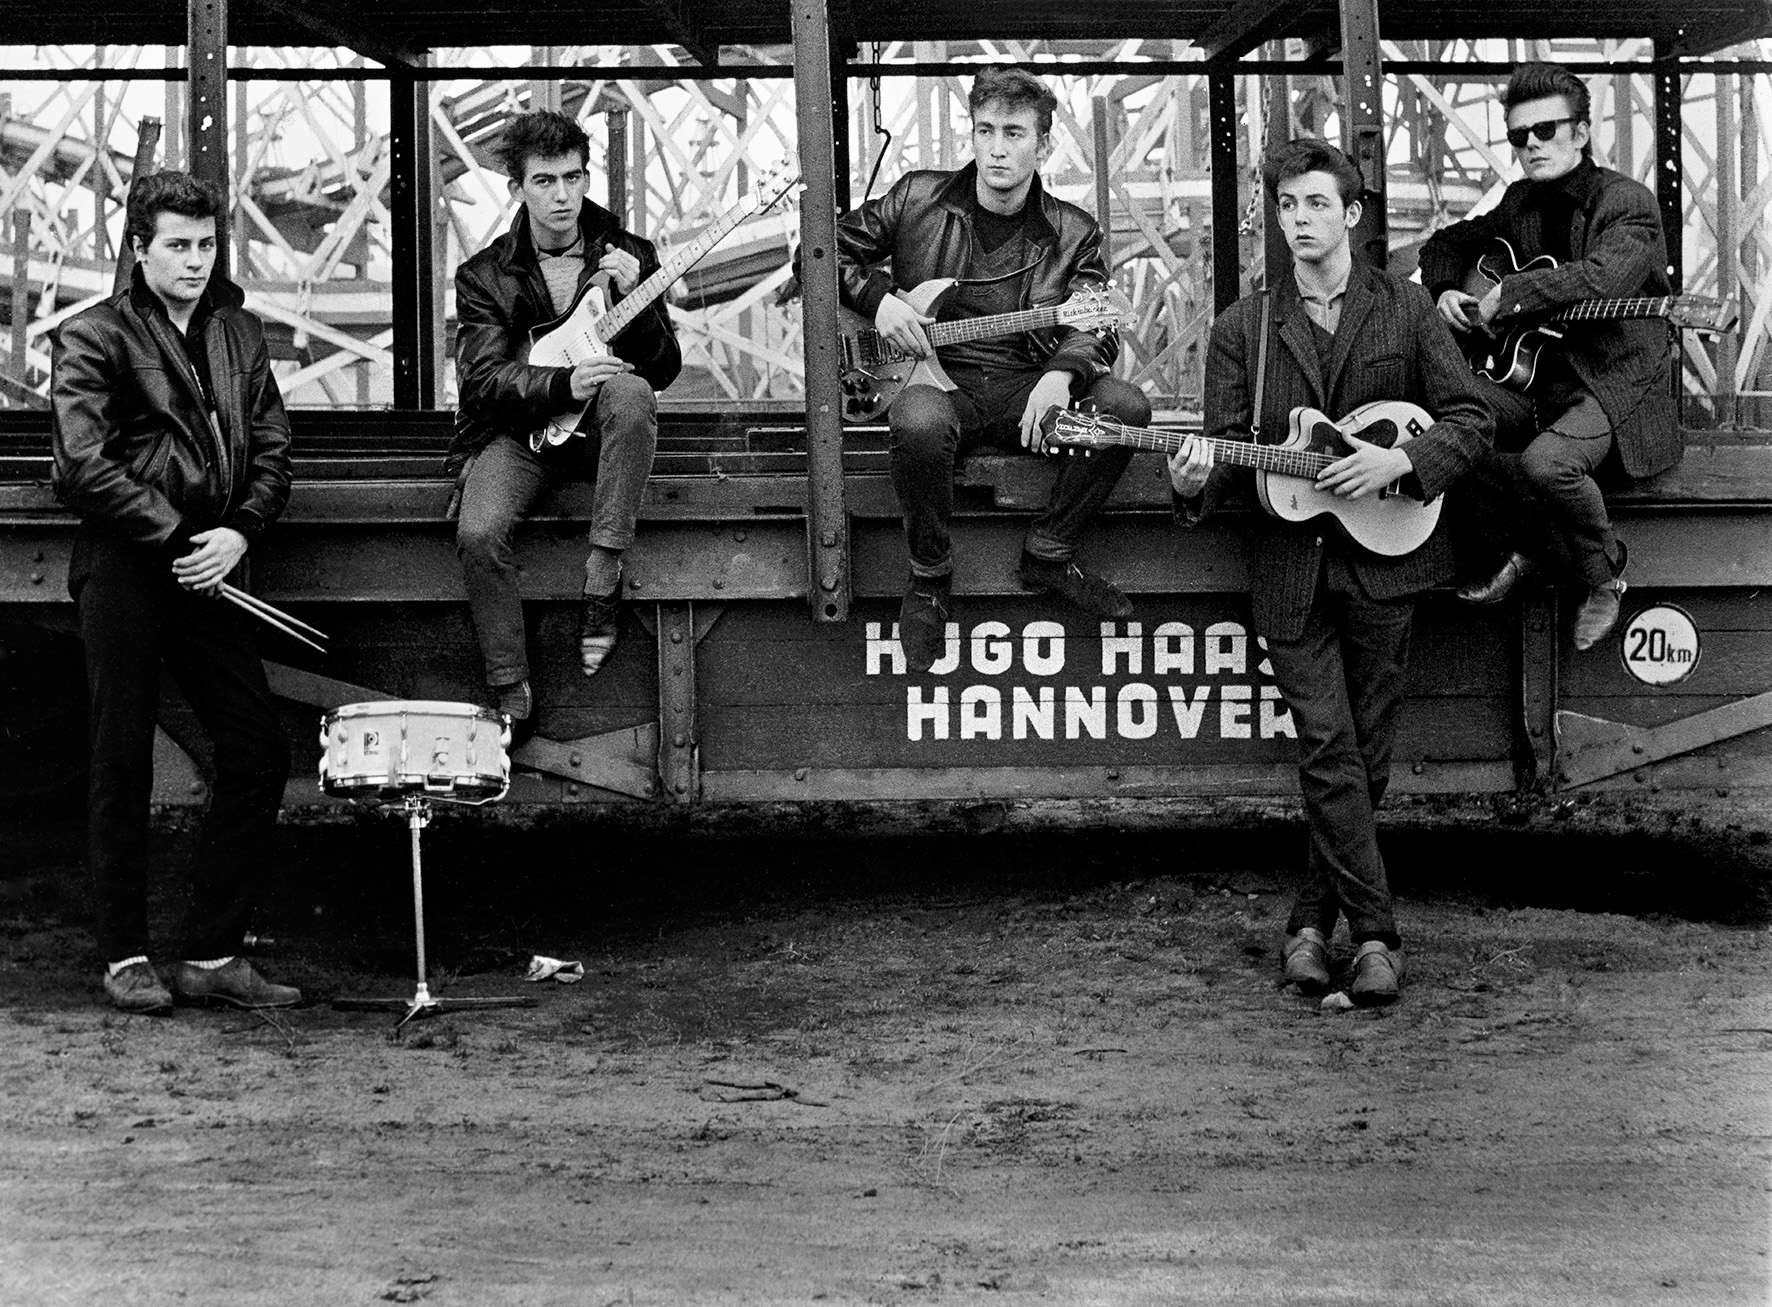 Now available: classic Astrid Kirchherr photographs of The Beatles ...